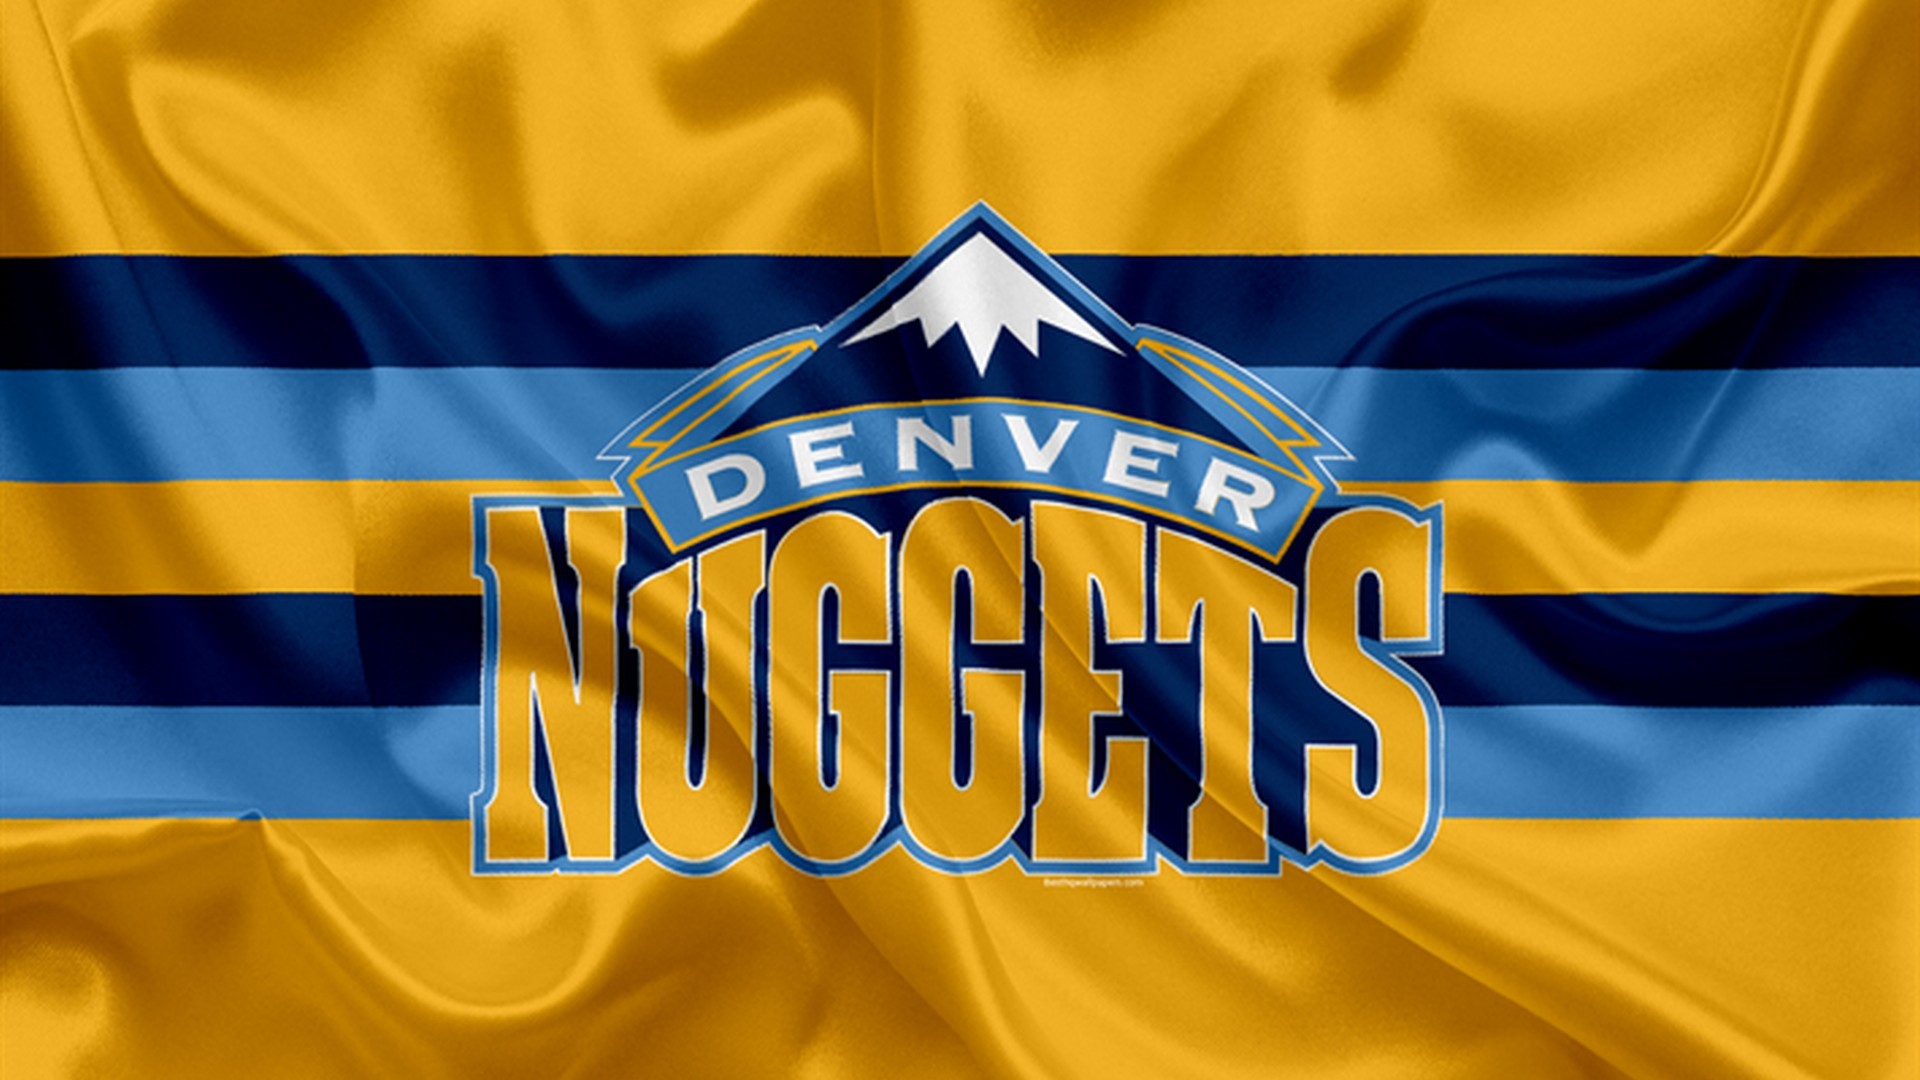 Denver Nuggets Desktop Wallpaper with high-resolution 1920x1080 pixel. You can use this wallpaper for your Desktop Computer Backgrounds, Windows or Mac Screensavers, iPhone Lock screen, Tablet or Android and another Mobile Phone device